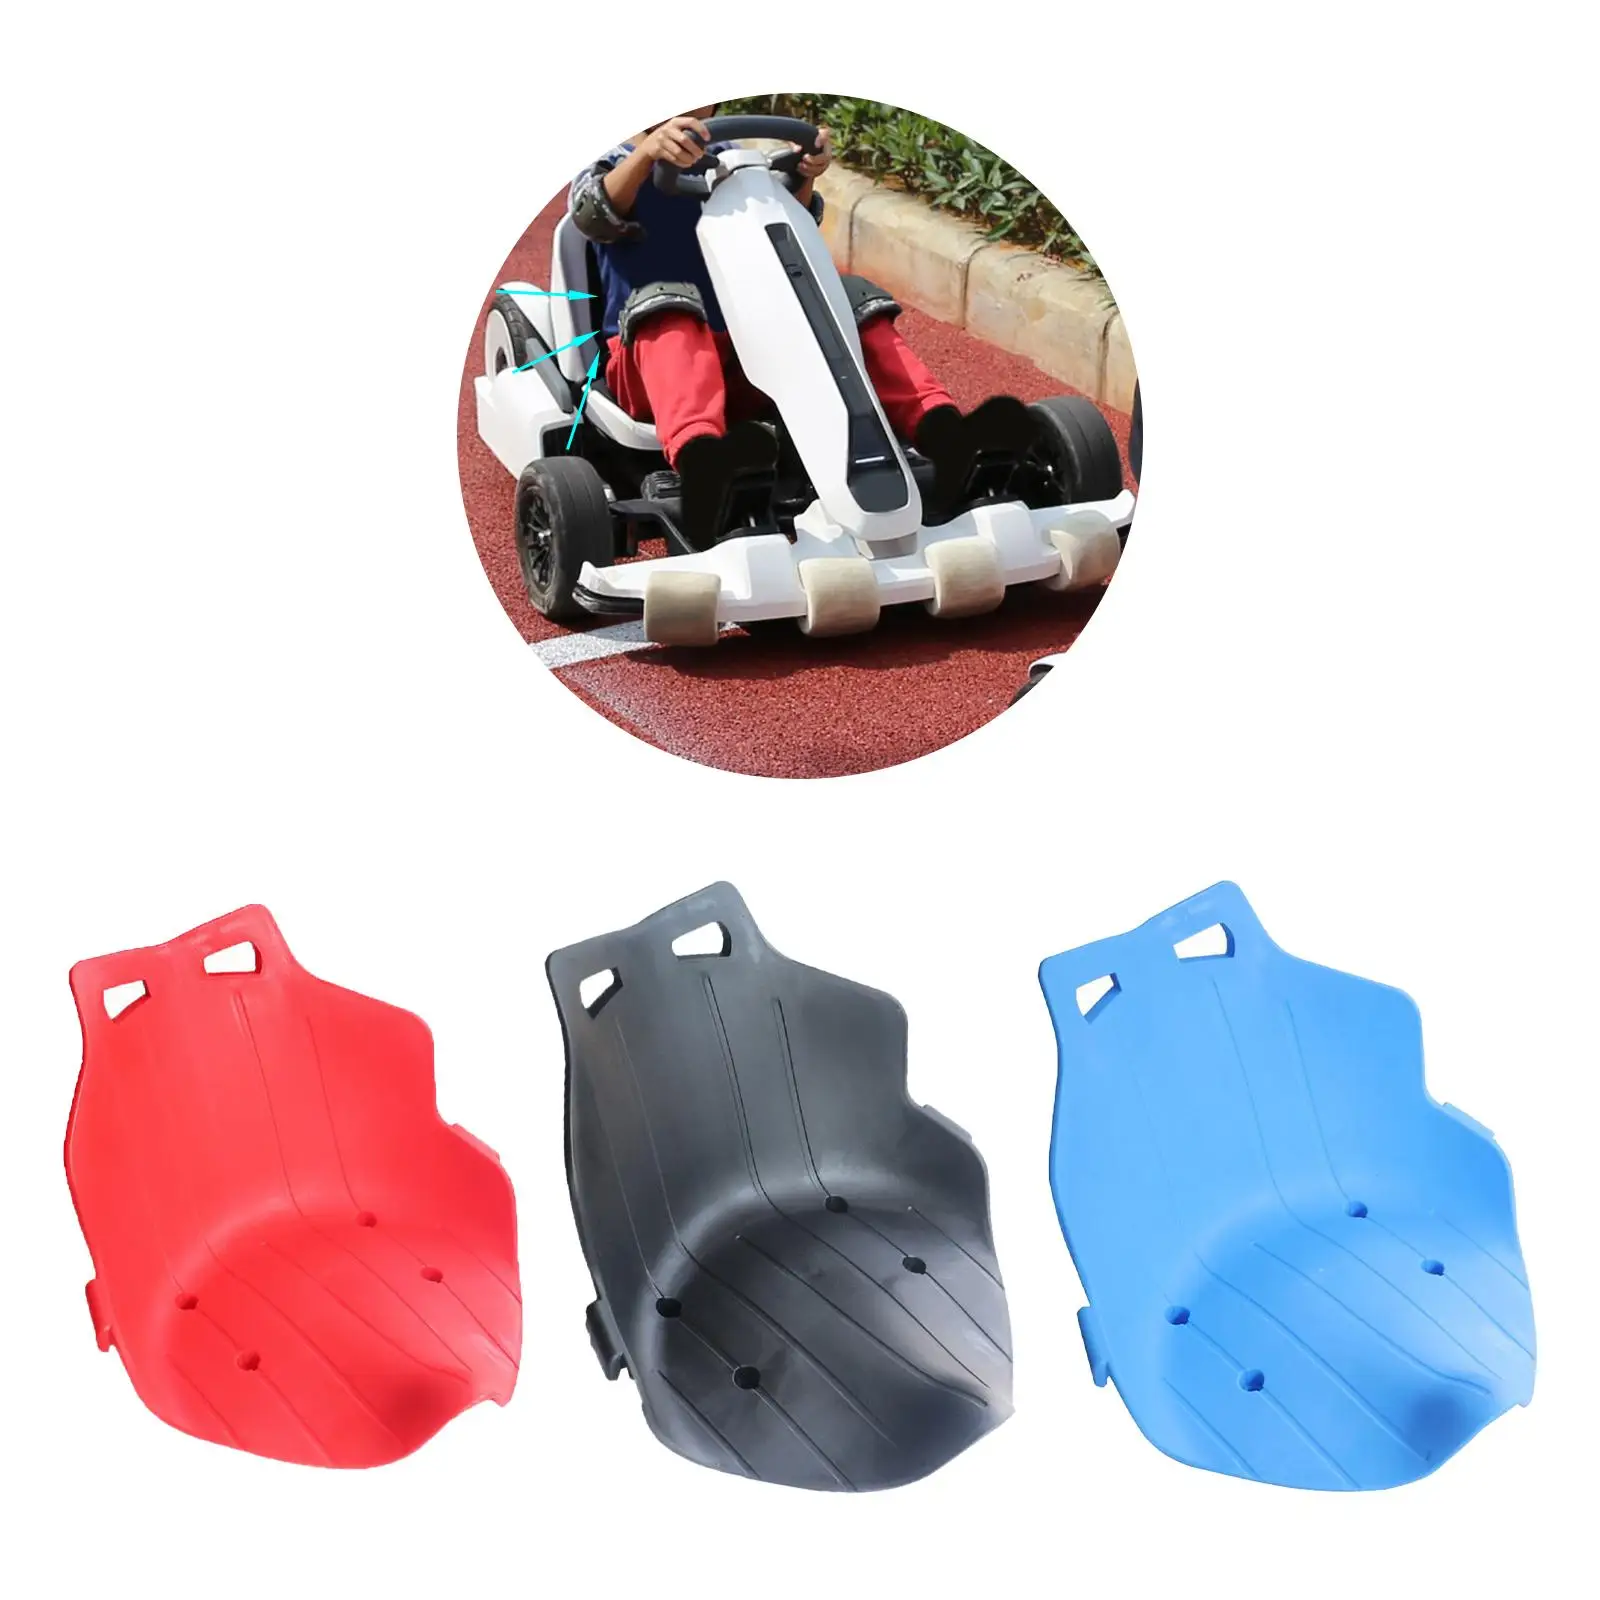 Kids Seat Attachment for Racing Cart Racing Go Kart Car Seat Saddle Drift Cart Seat Saddle Drift Trikes Seat Saddle